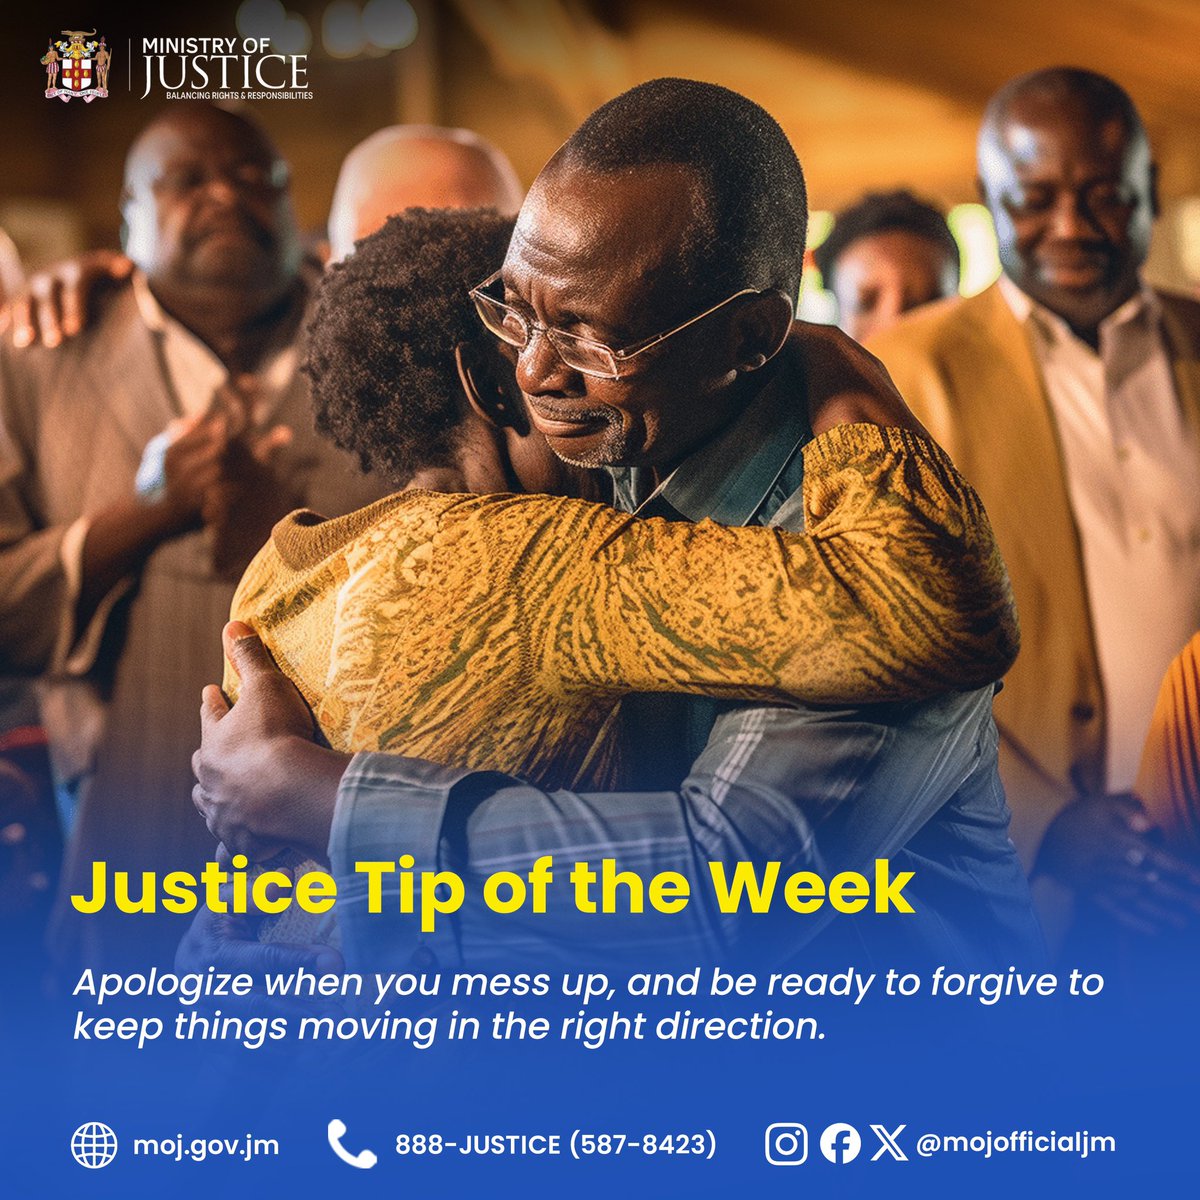 Say sorry fi yuh mistake dem, an' show seh yuh willing fi forgive an' forget. 

#JusticeforPeaceandHarmony #RestorativeJustice #JusticeTips #JusticeTipoftheWeek #ForgiveandForget